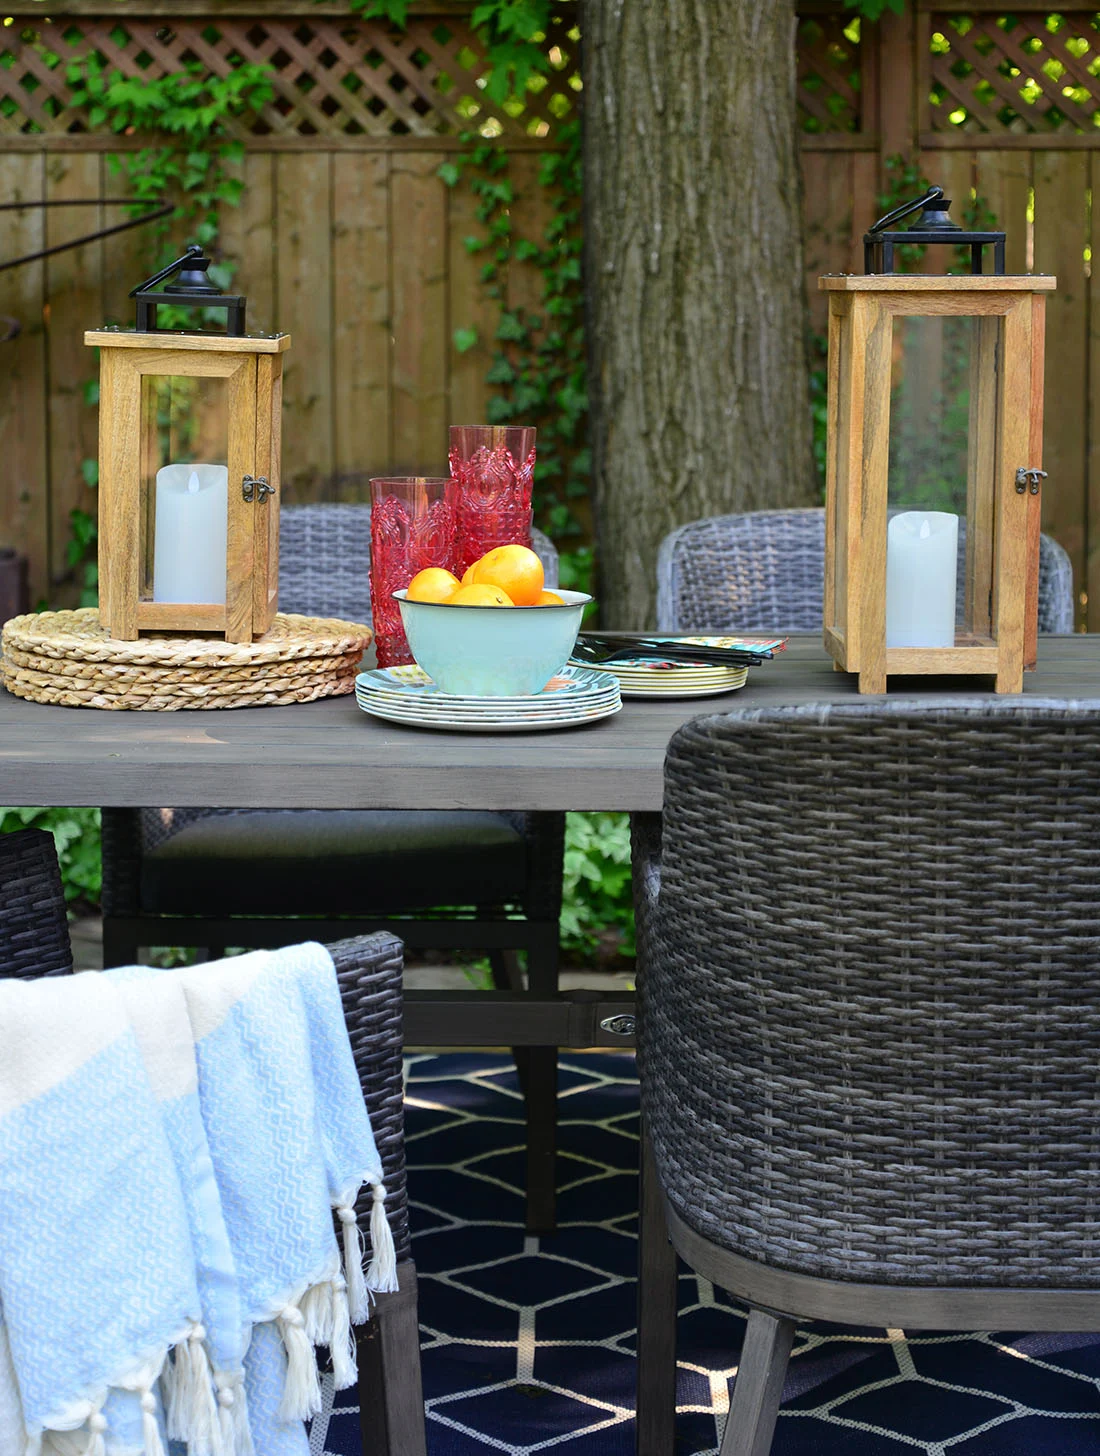 summer table setting, outdoor dining decor, outdoor summer decor, oranges in bowls, wooden lanterns on table